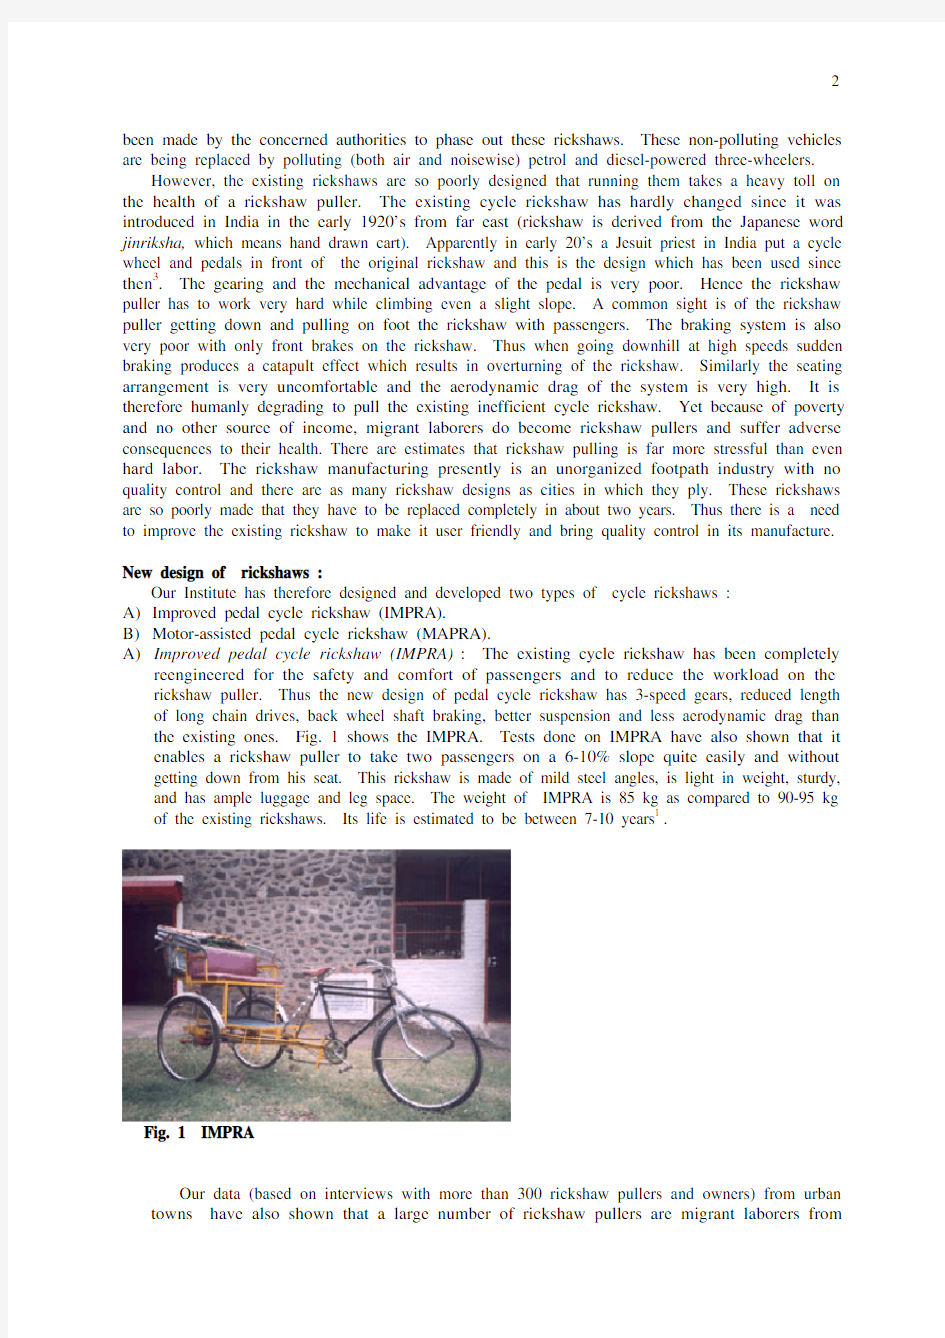 Electric and improved cycle rickshaw as a sustainable transport system for India